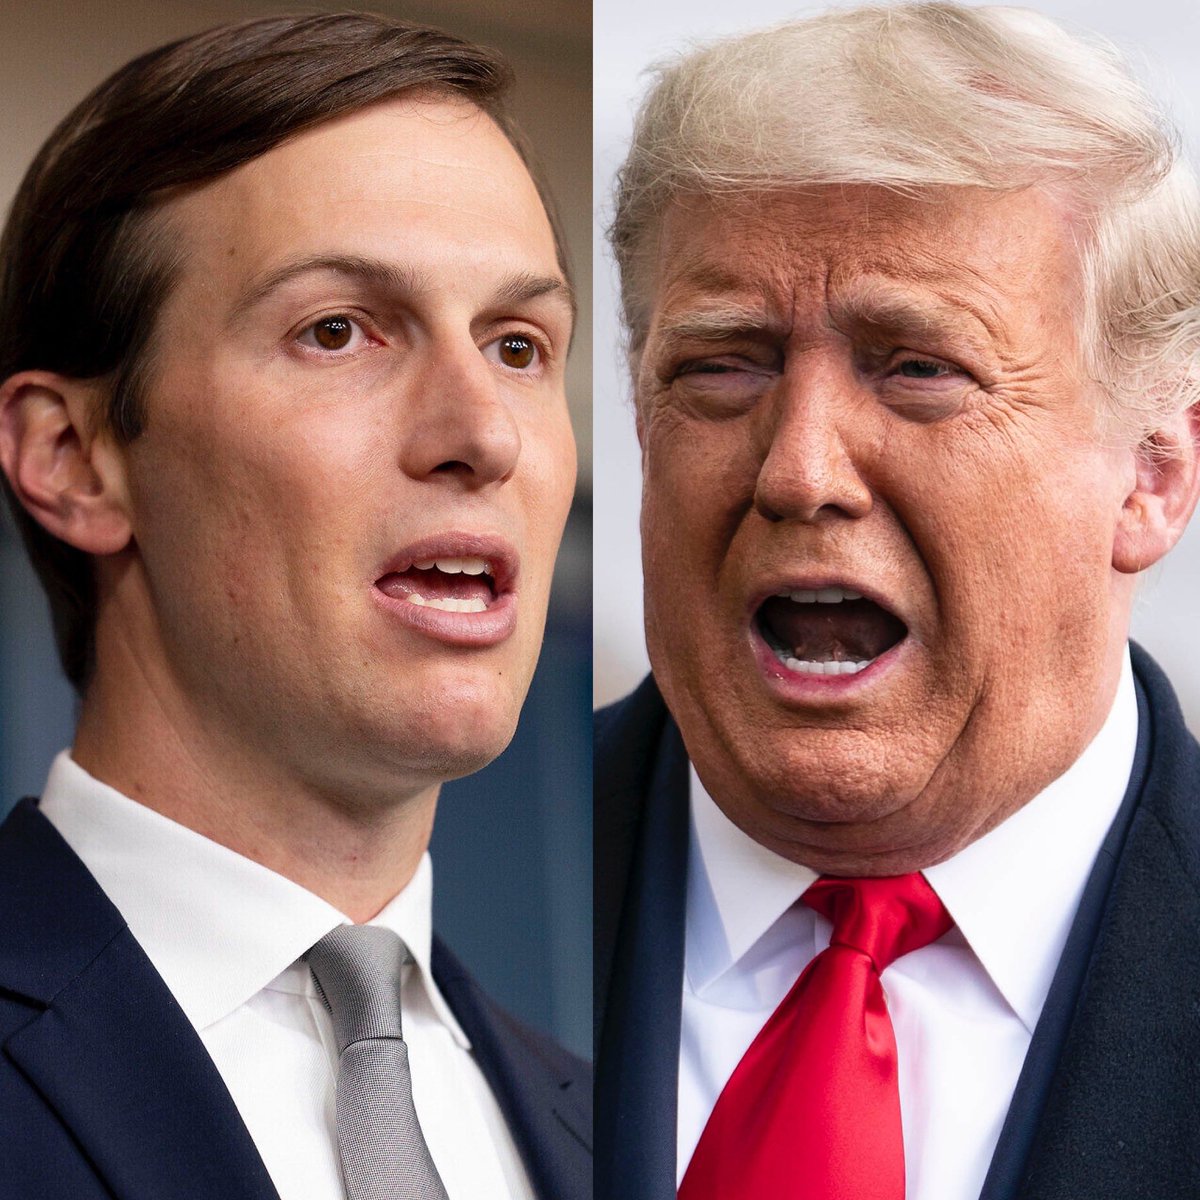 BREAKING: Donald Trump’s son-in-law is embroiled in scandal as it’s revealed that his shady investment firm is financed almost entirely by foreign investors. And it gets so much worse… The investors in question are largely individuals that Kushner dealt with while in Trump’s